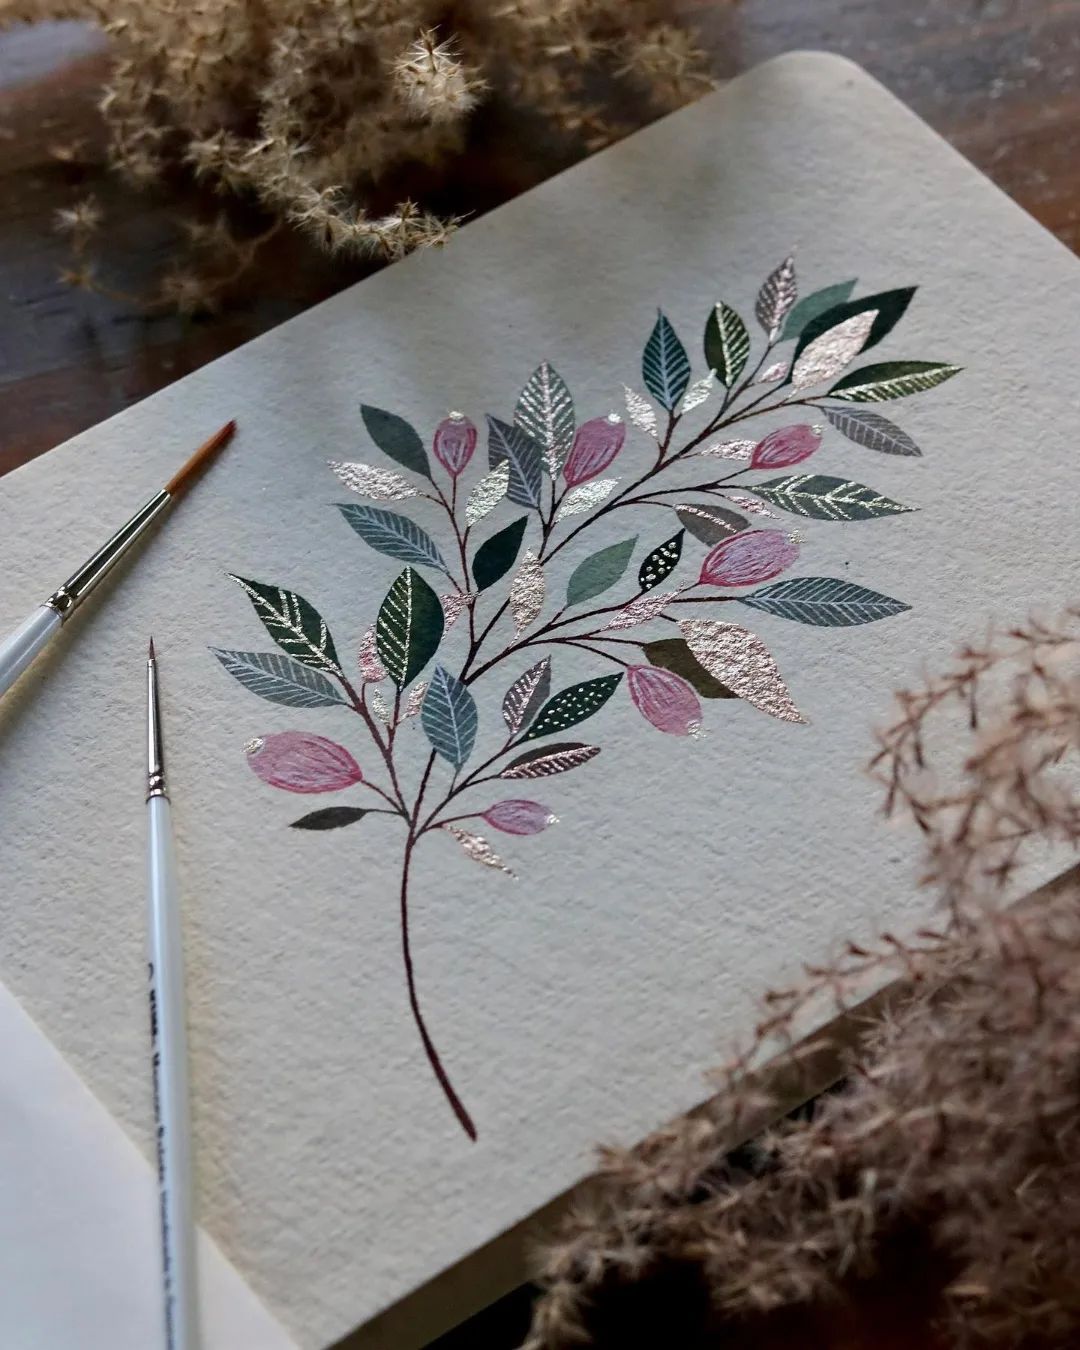 illustrationow@instagram on Pinno: Watercolor with Filigree and Metallic  De